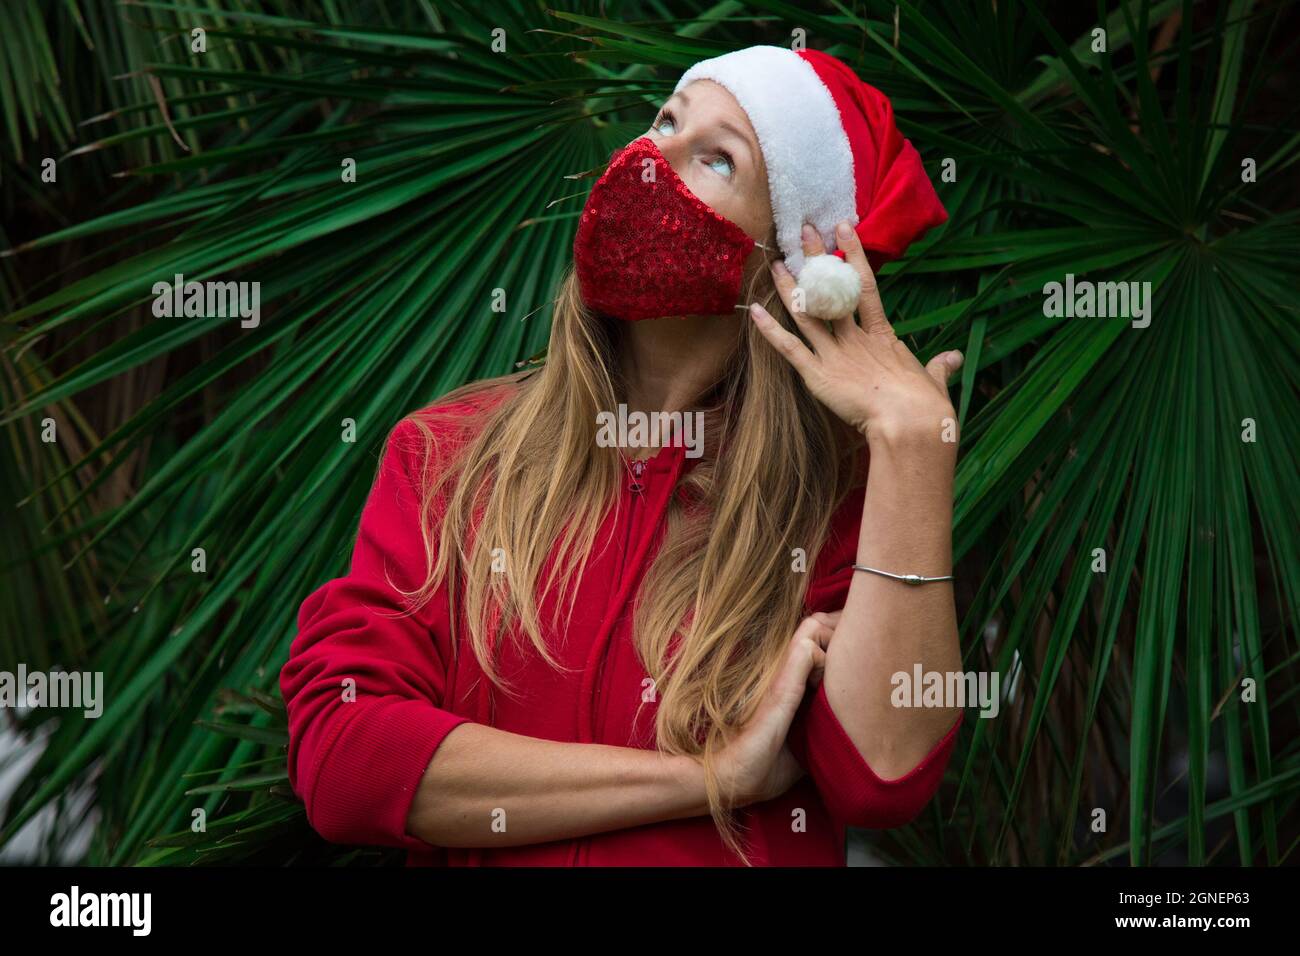 Caucasian blond girl in red hat, coat and red protective face mask with palm leafs behind. Thinking of Christmas 2020. Celebrating pandemic new 2021 Stock Photo